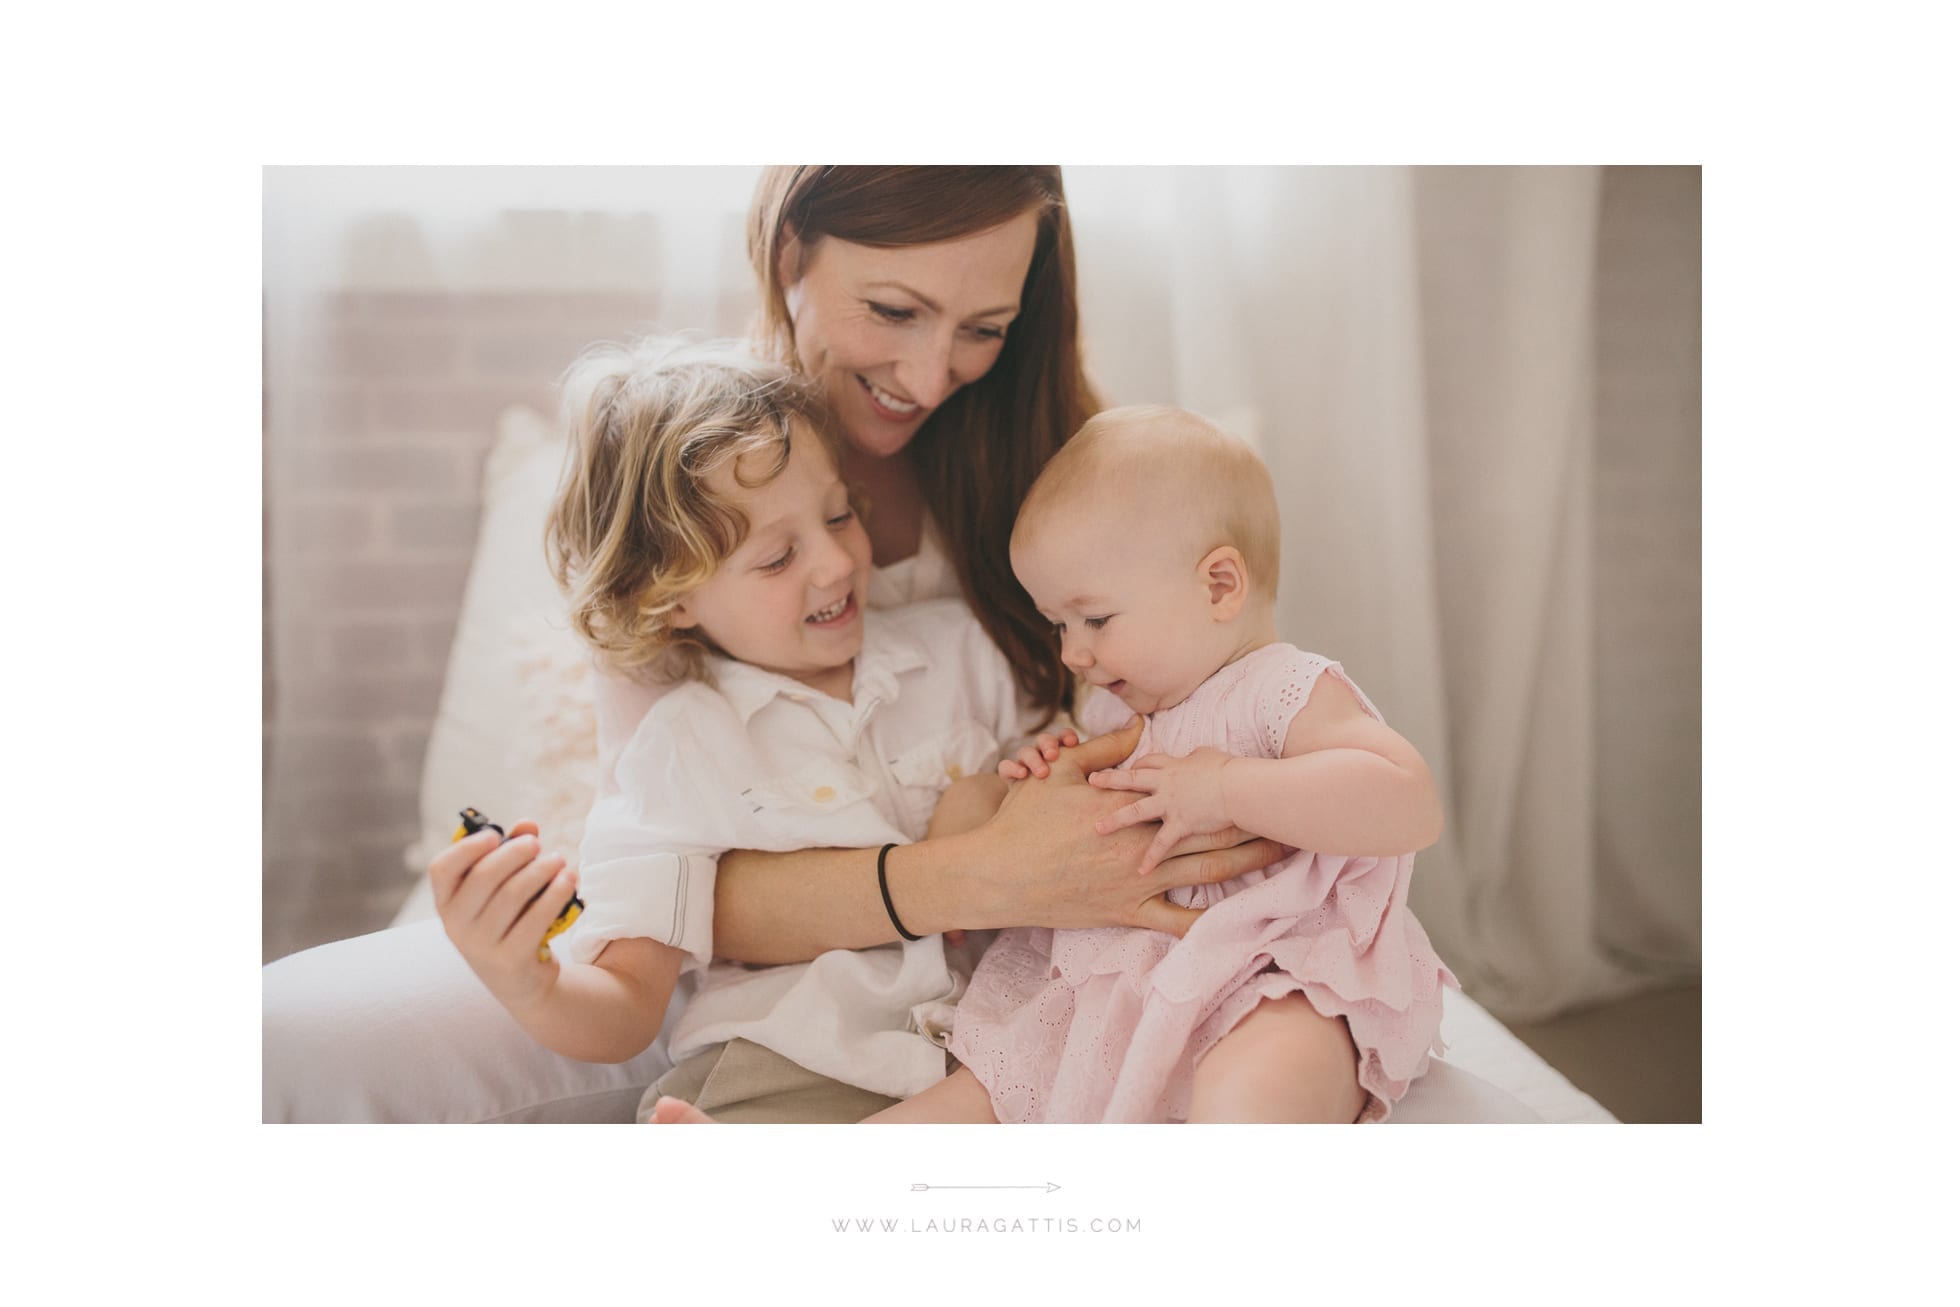 mother and child natural light studio | laura gattis photography